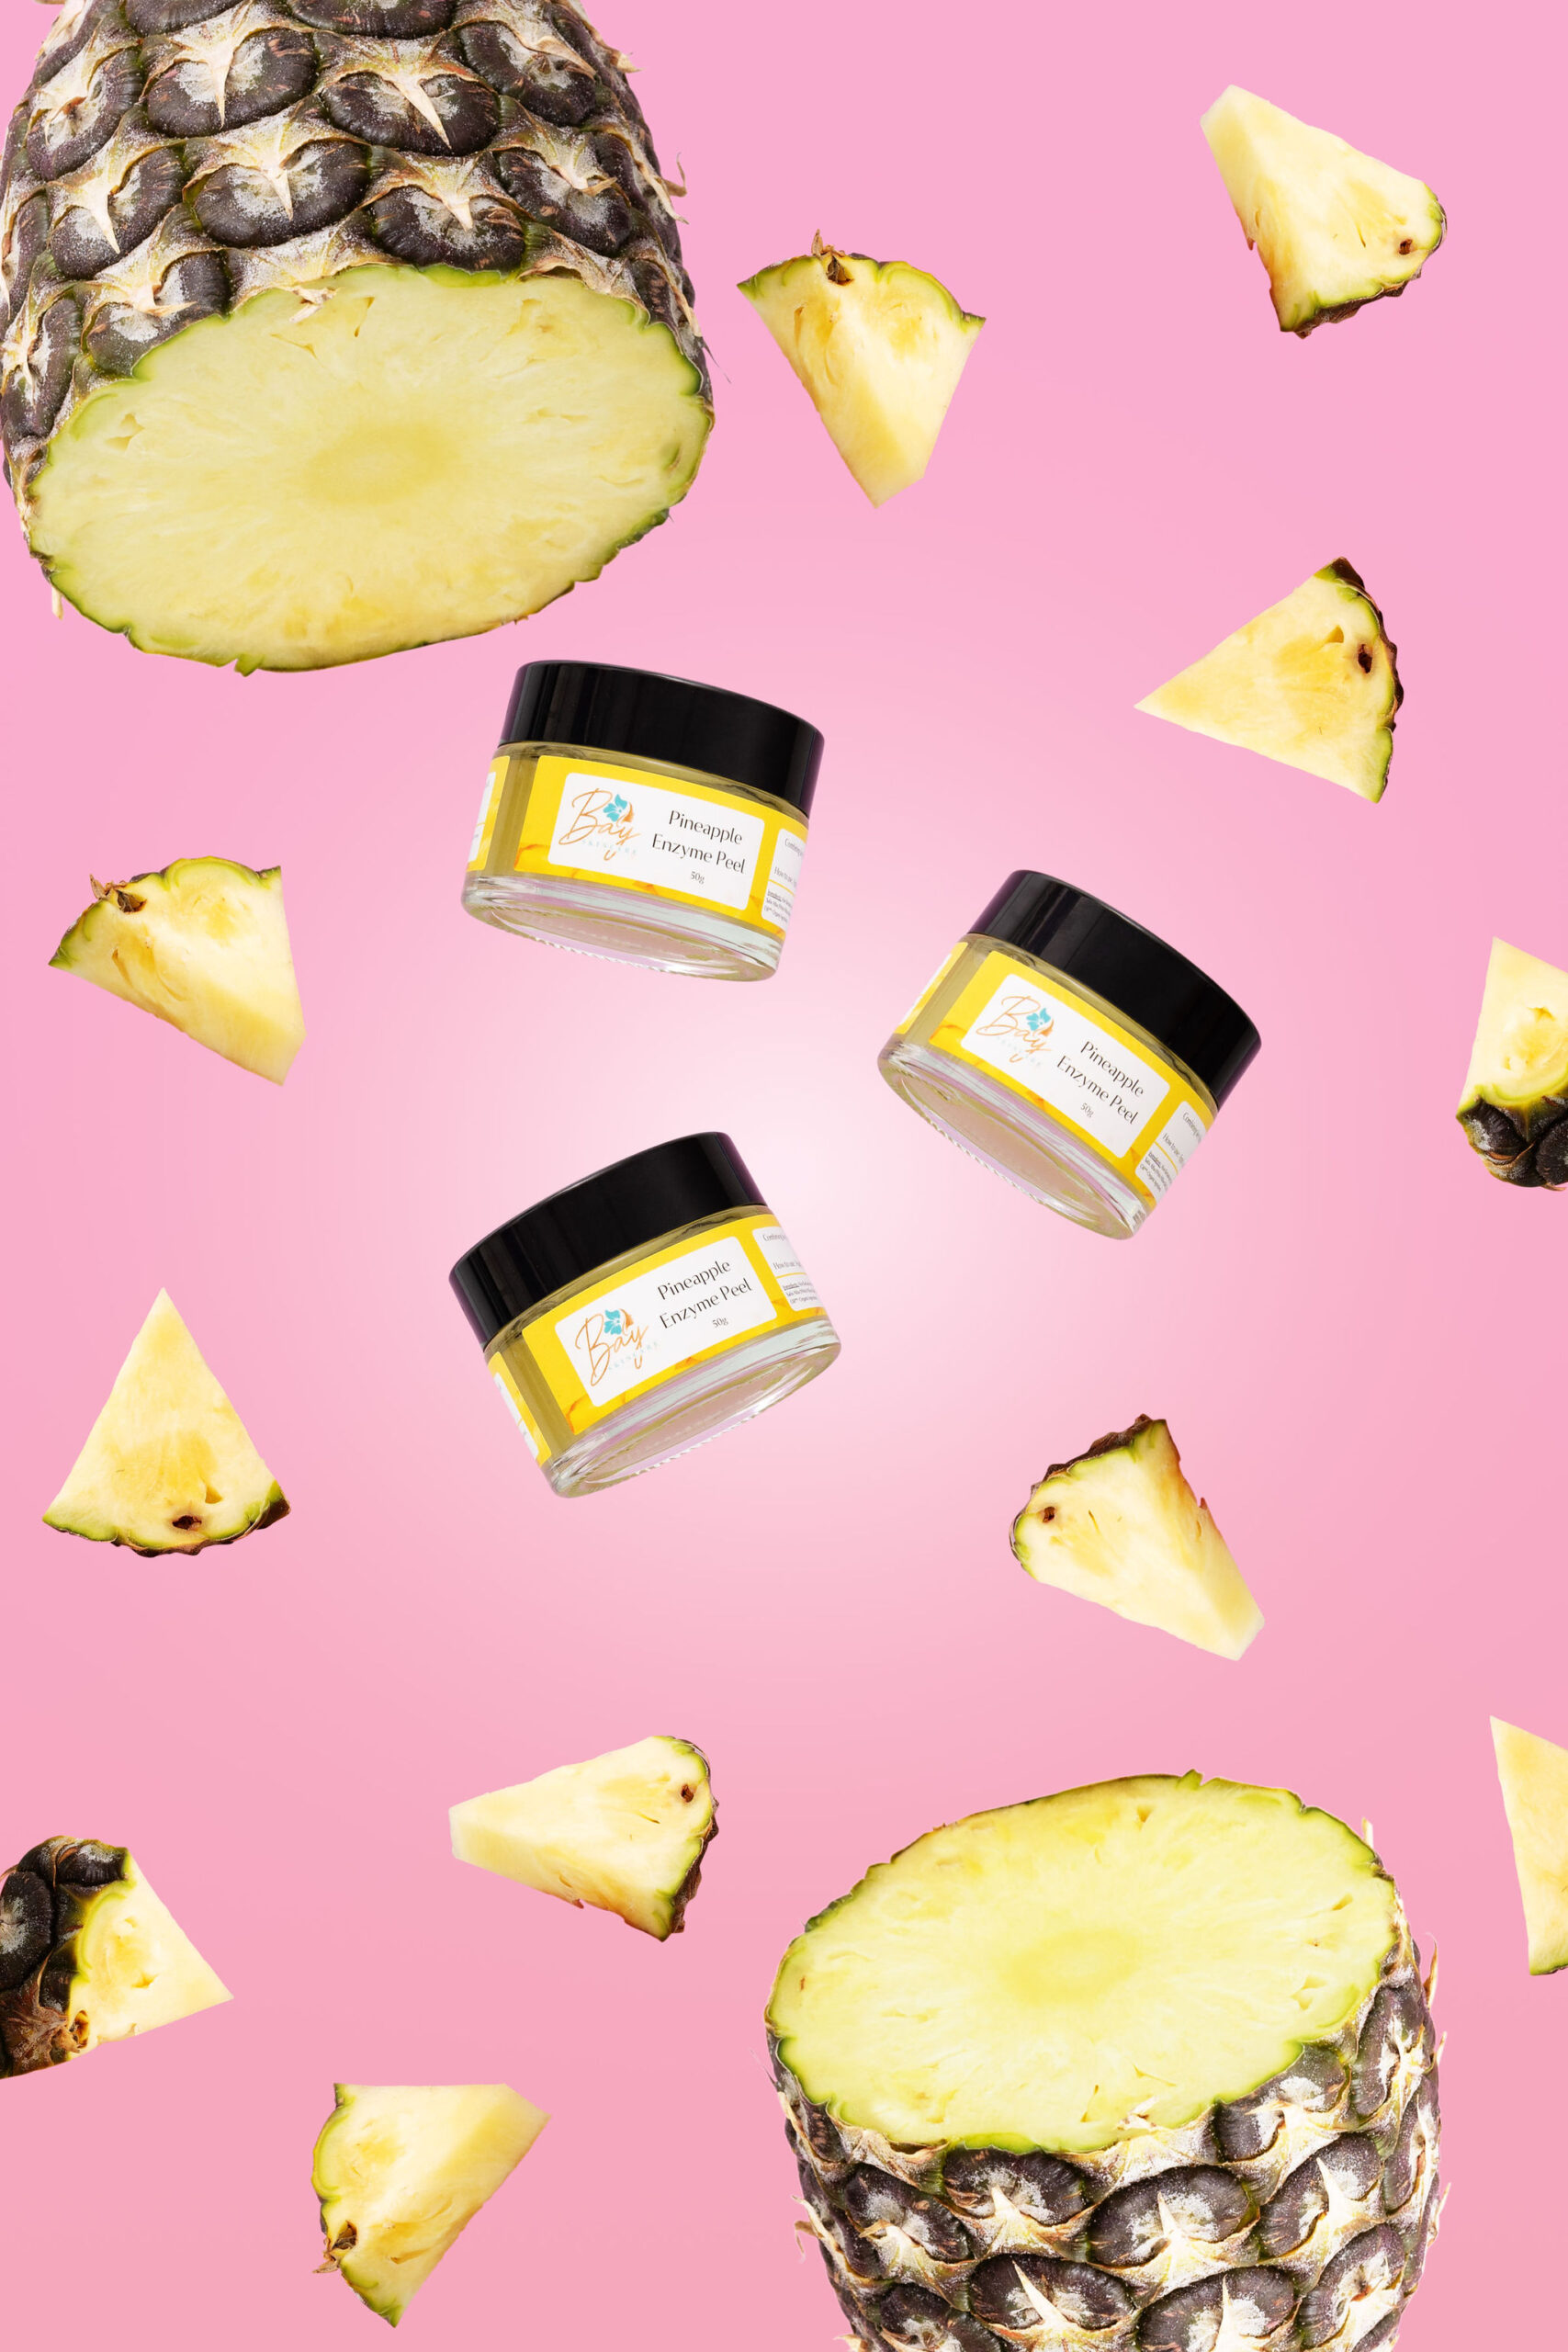 Fruity and Colourful Floating Skincare Product Photography. Pineapple Product Shot. Shot and Styled by Colourpop Studio 